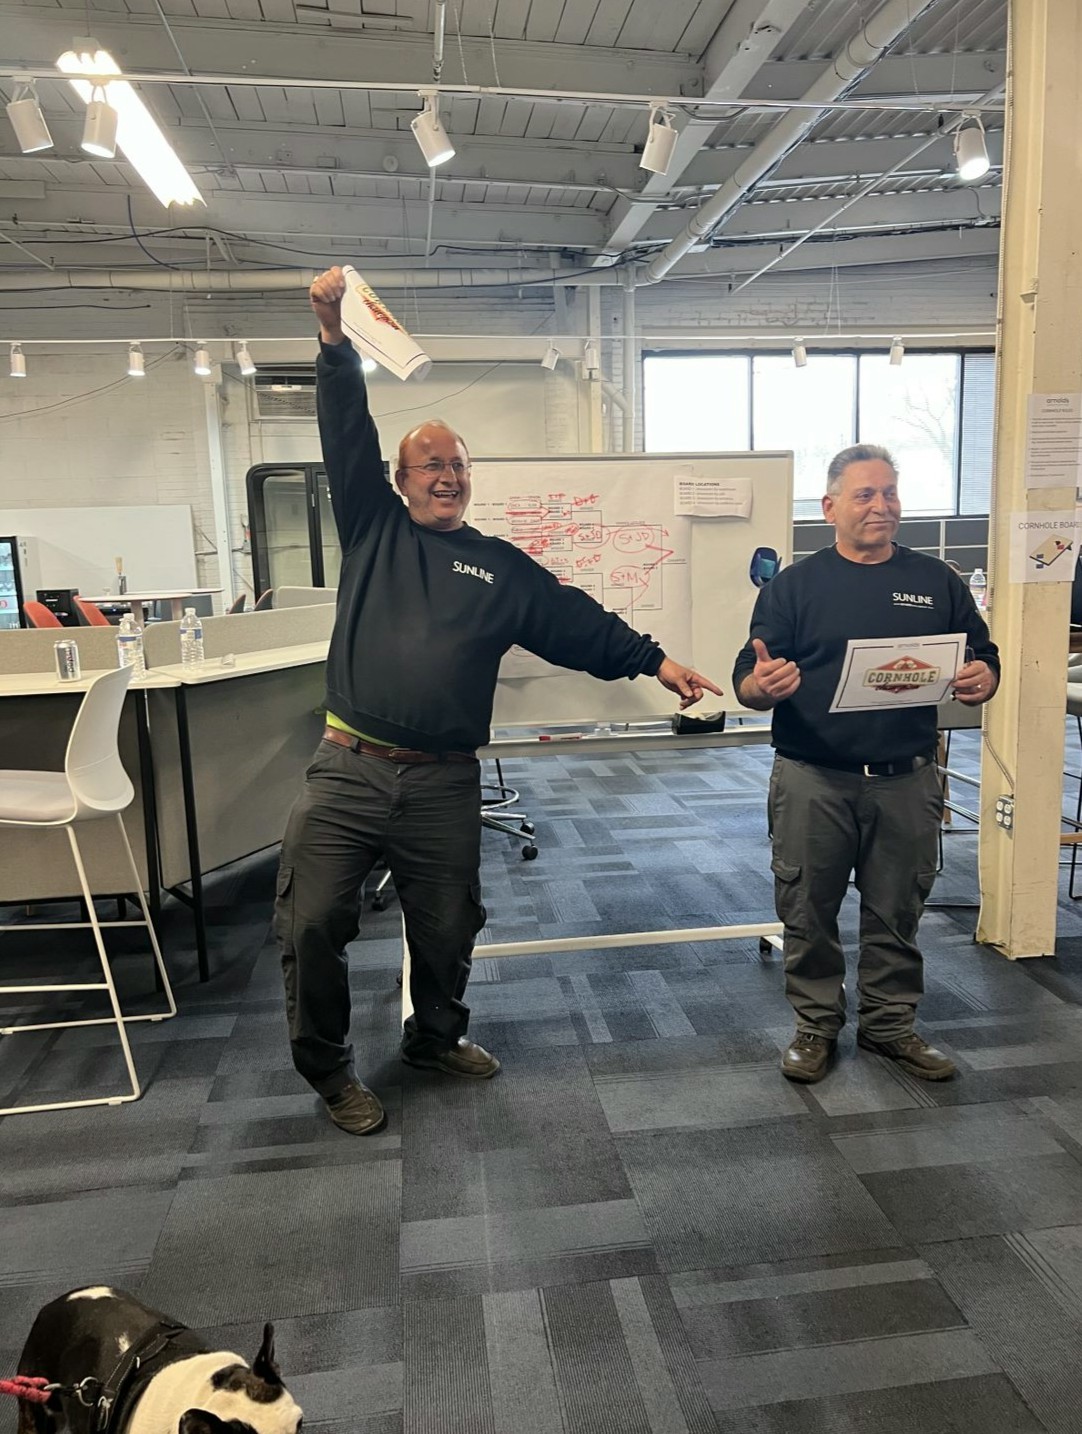 Cornhole winners! Our employees love participating in our cornhole tournament - a great way to bring everyone together.